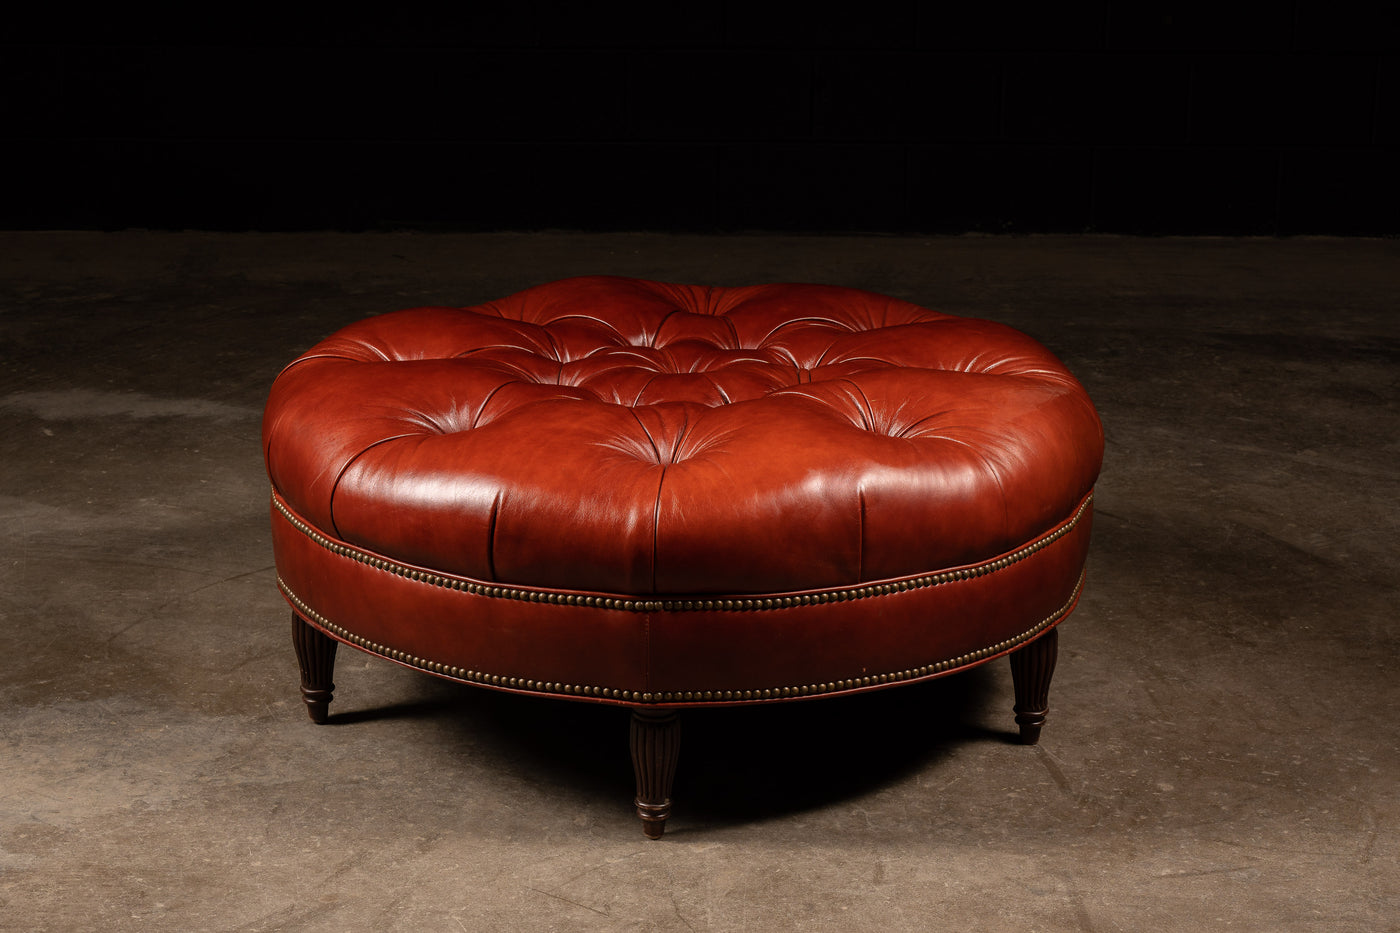 Vintage Red Tufted Ottoman